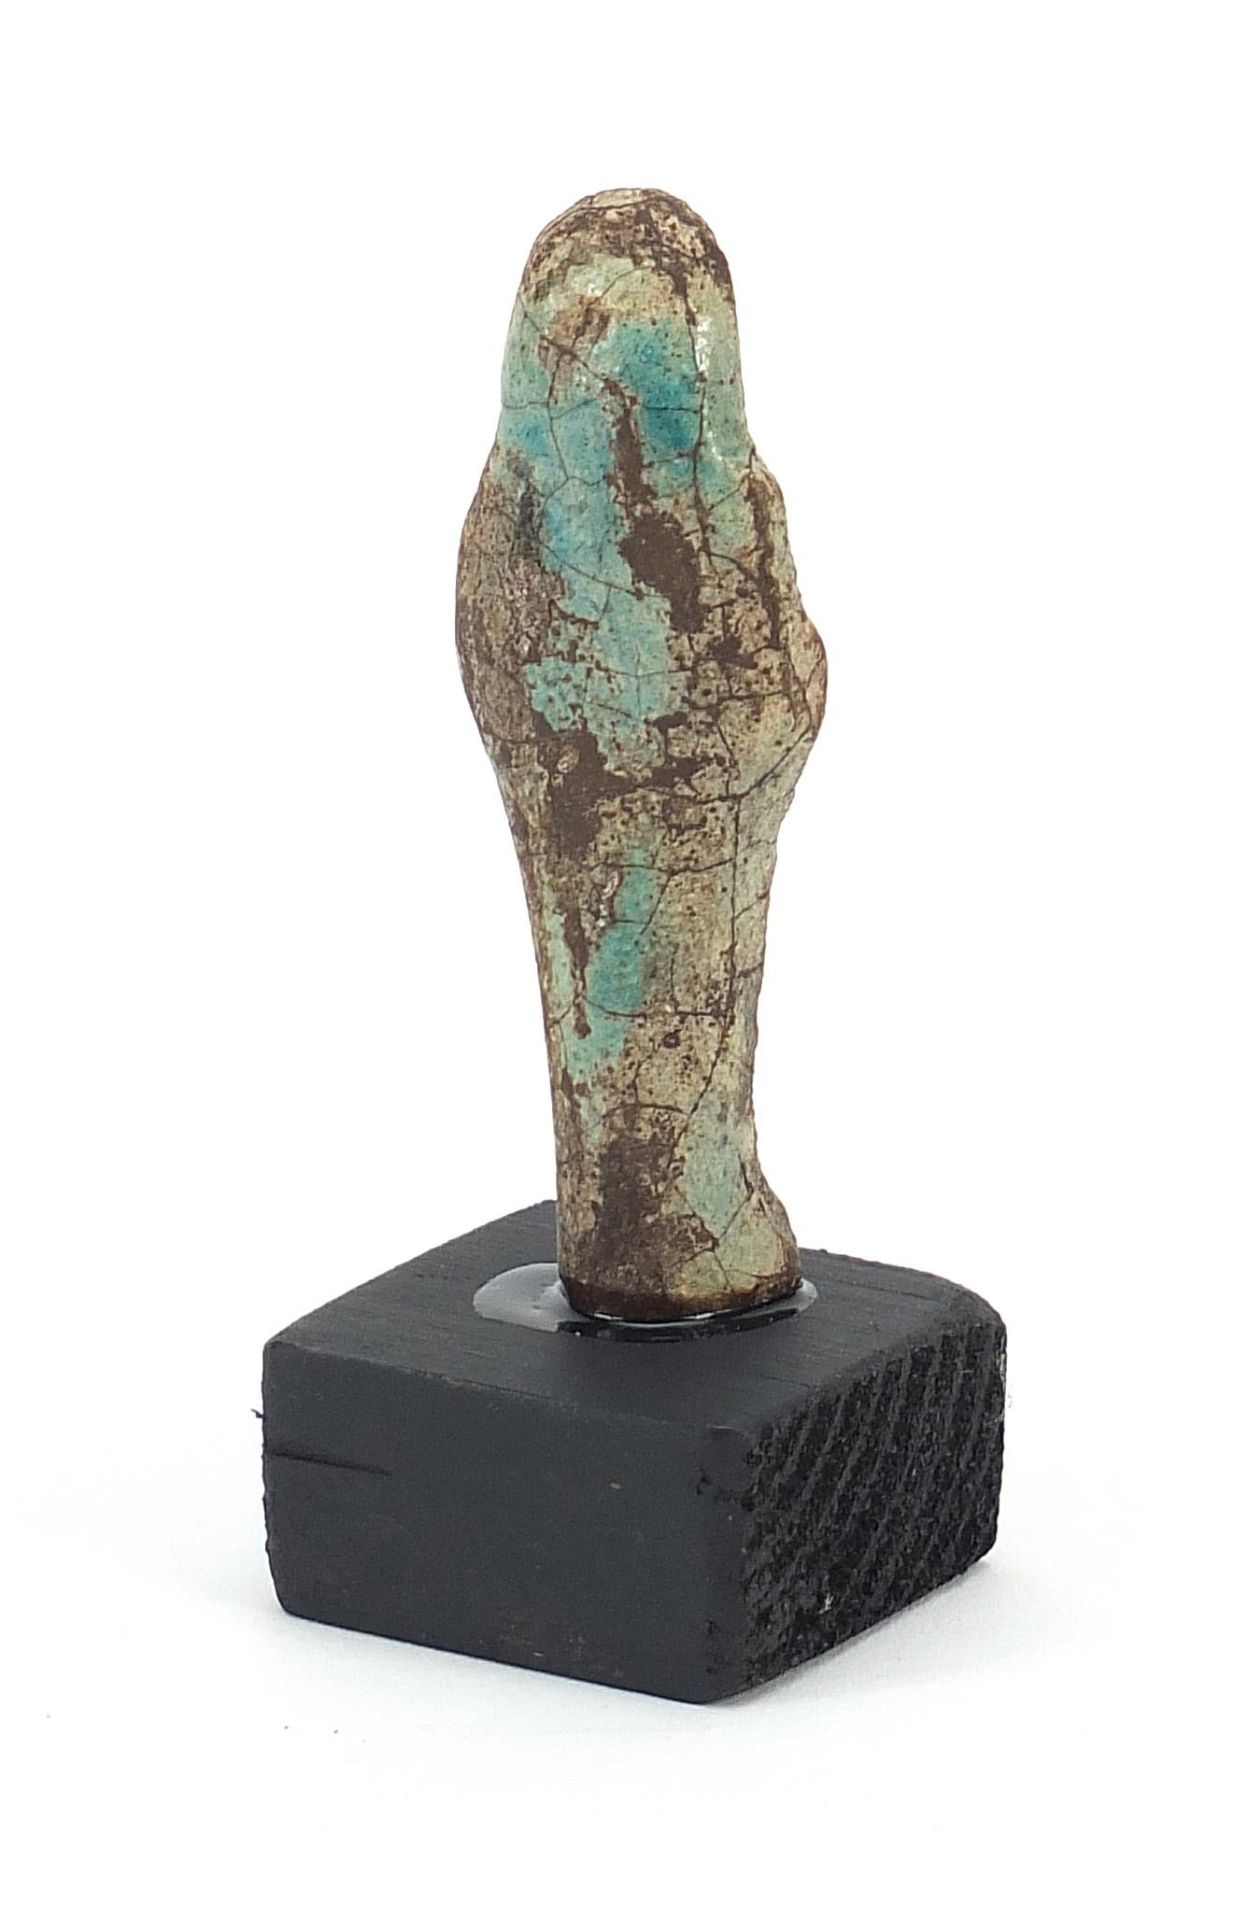 Egyptian style ushabti raised on a wooden base, overall 9cm high - Image 2 of 3